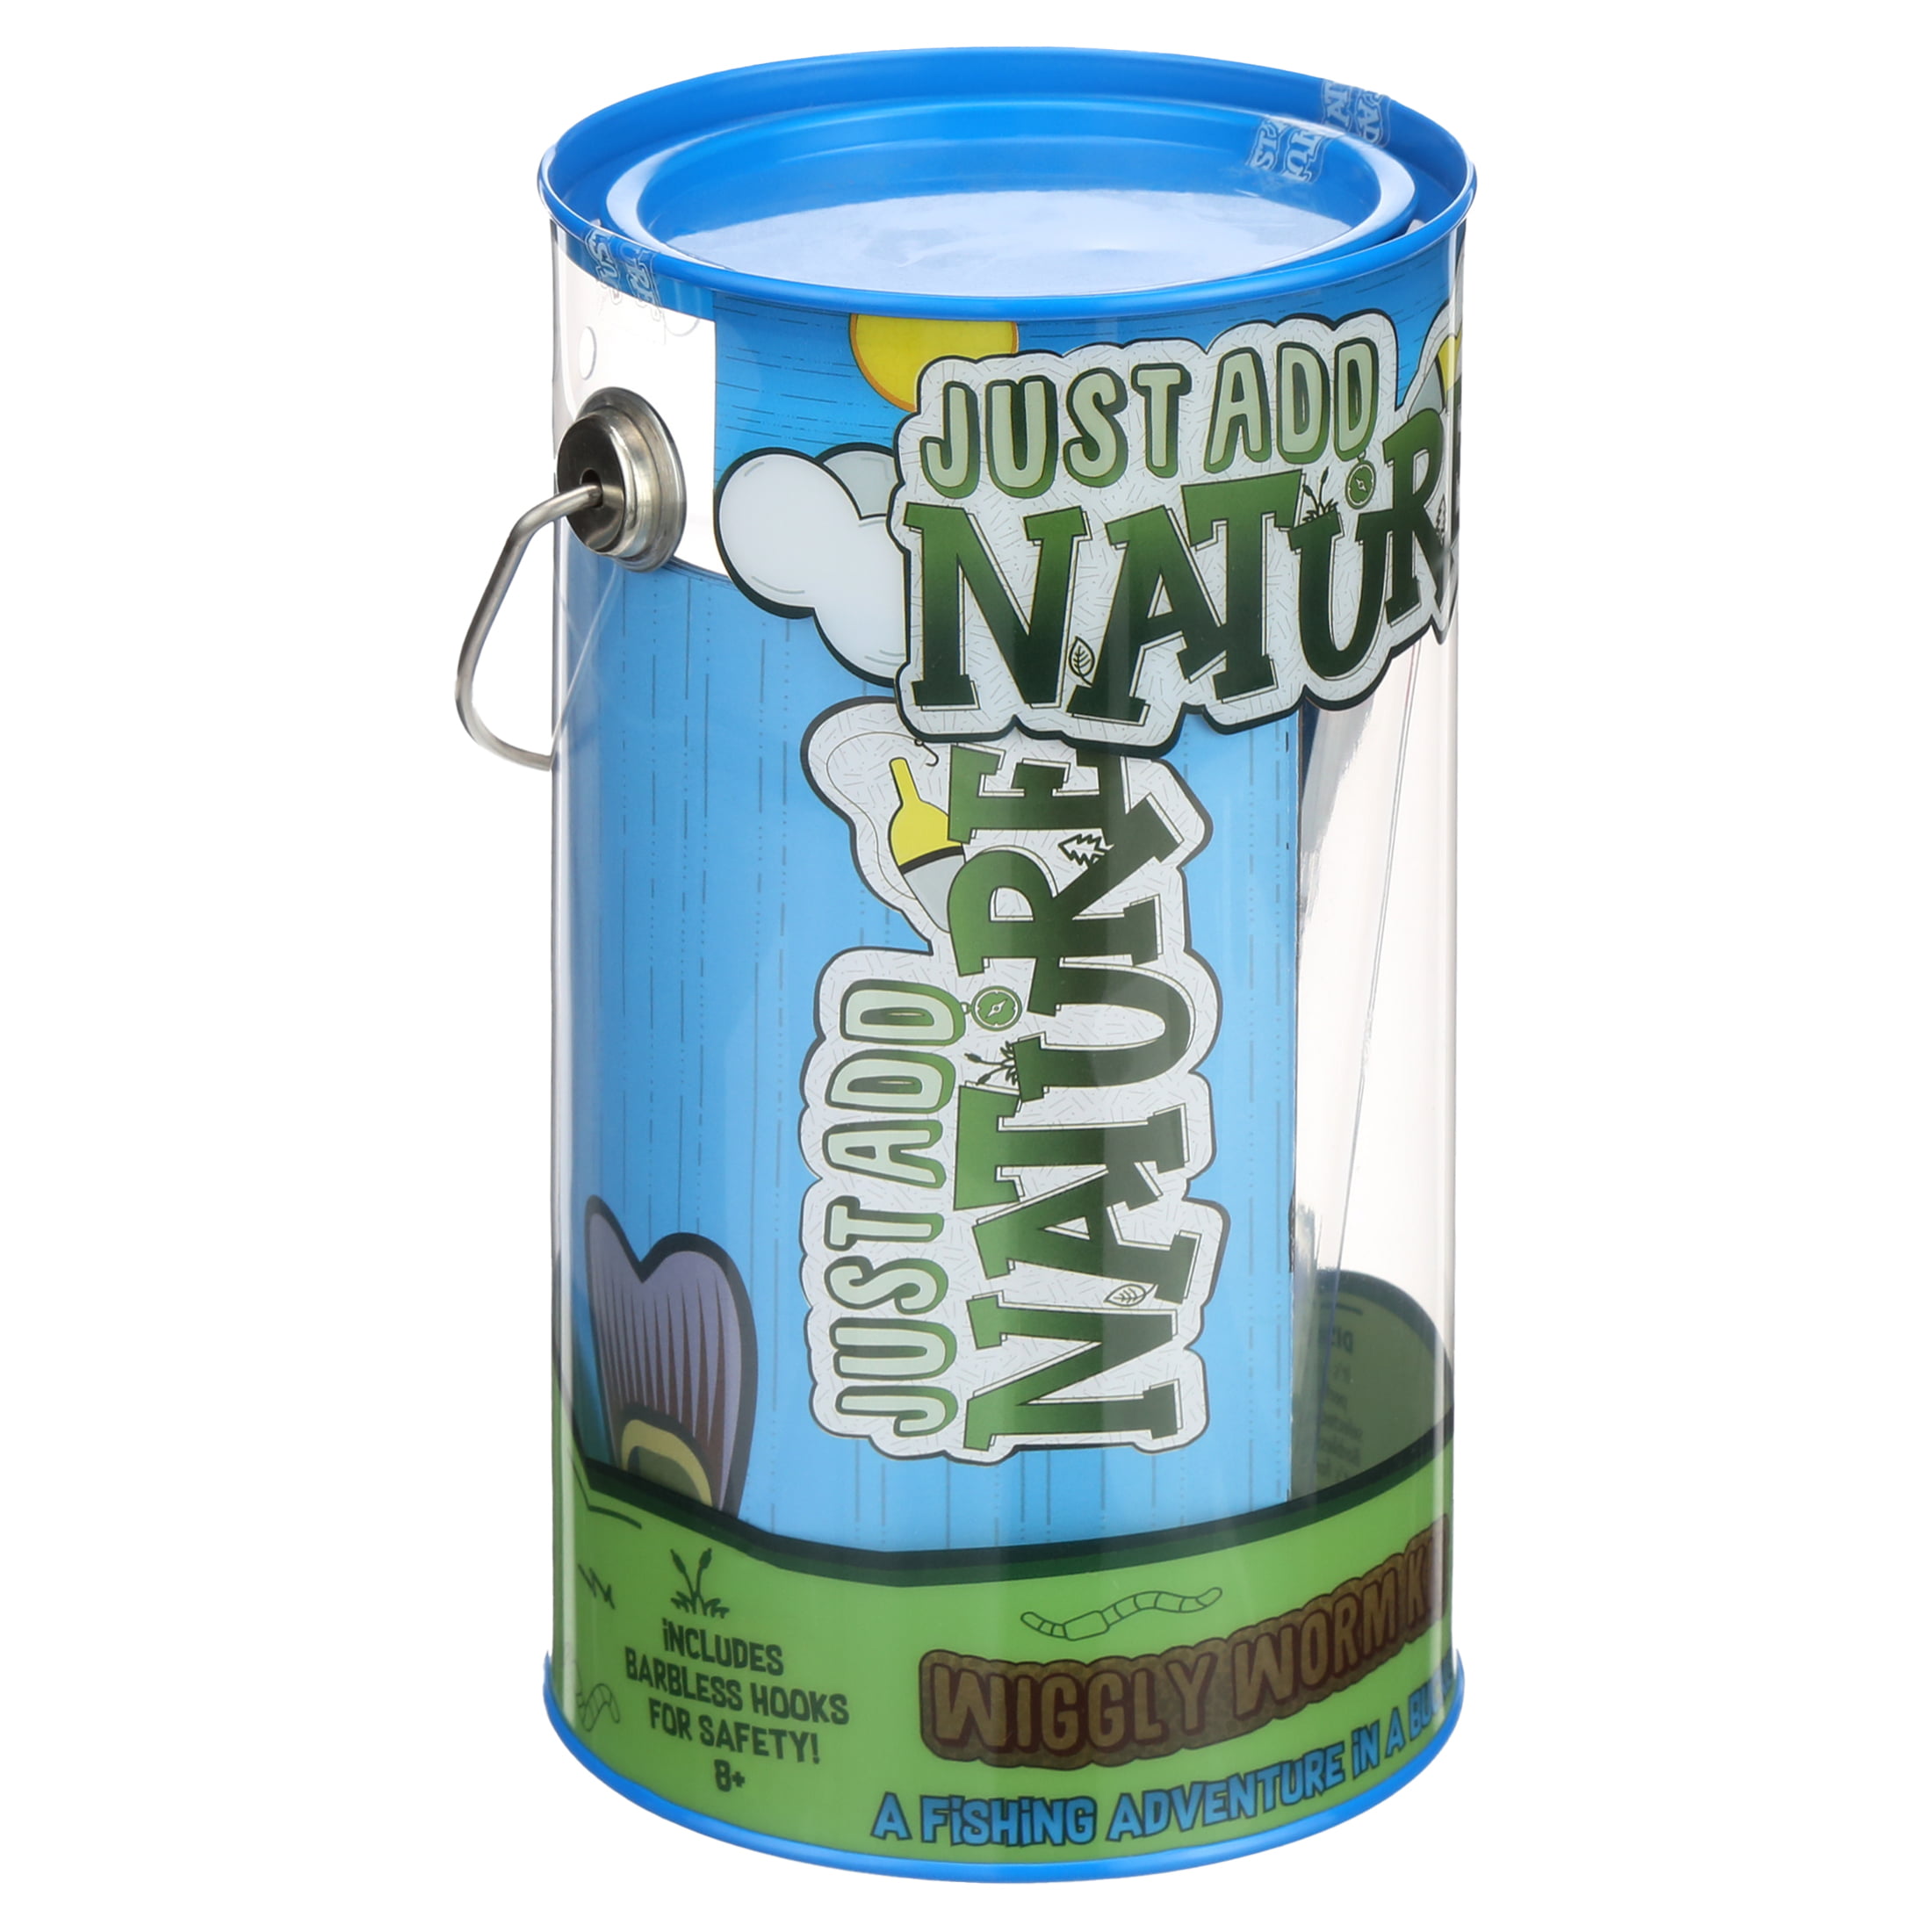 Just Add Nature Just Add Nature Wiggly Worm Discovery Educational Lure  Kits, Assorted